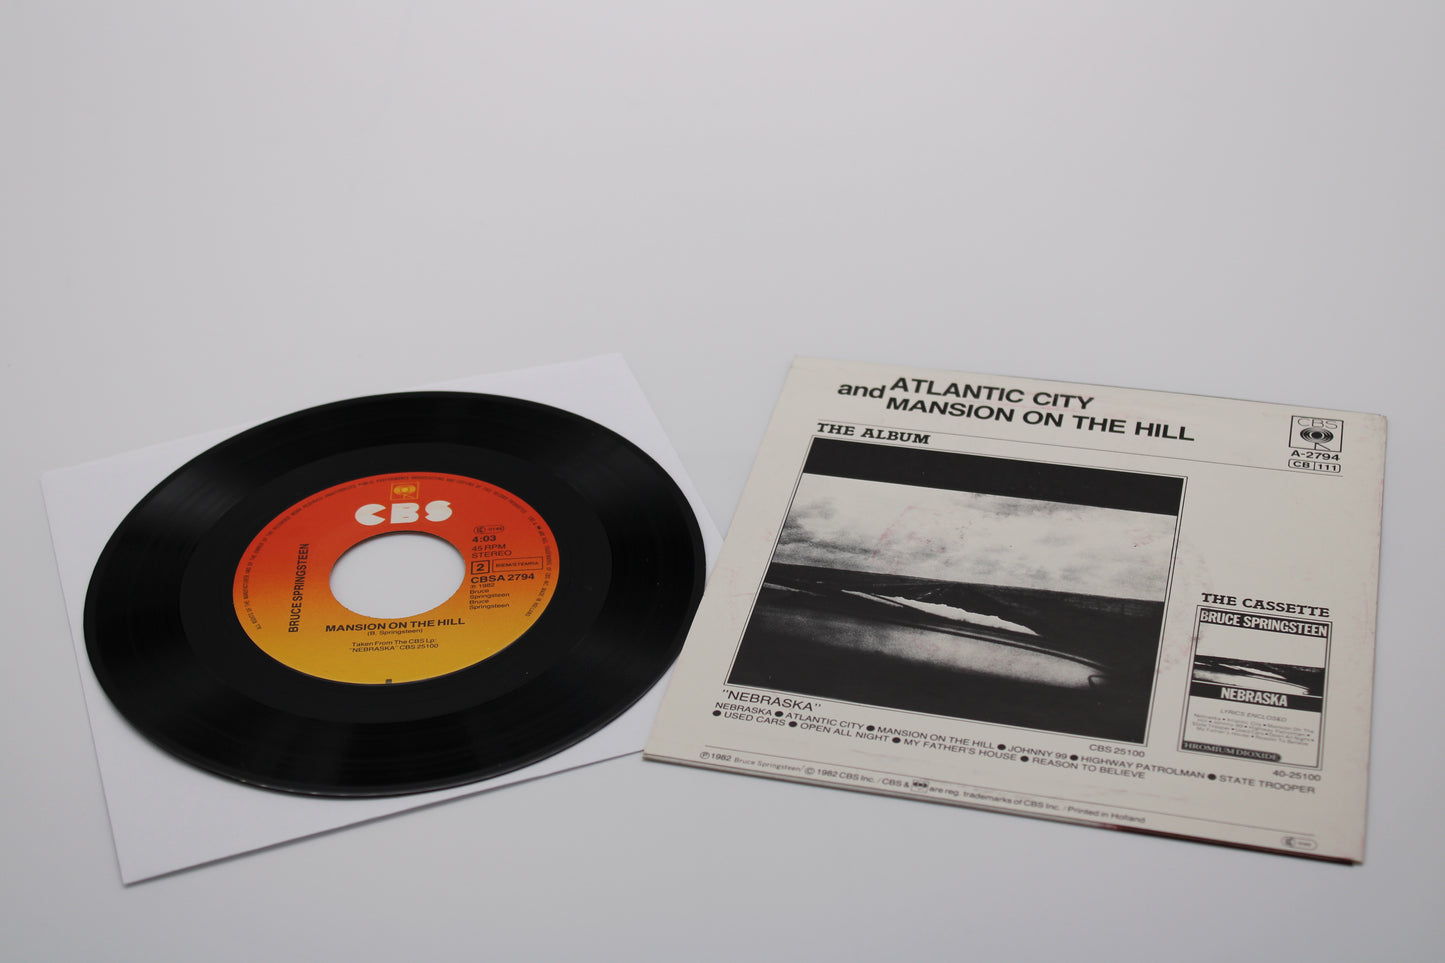 Bruce Springsteen "Atlantic City" 45 record – Single w/Picture Sleeve Vinyl Import Collectible